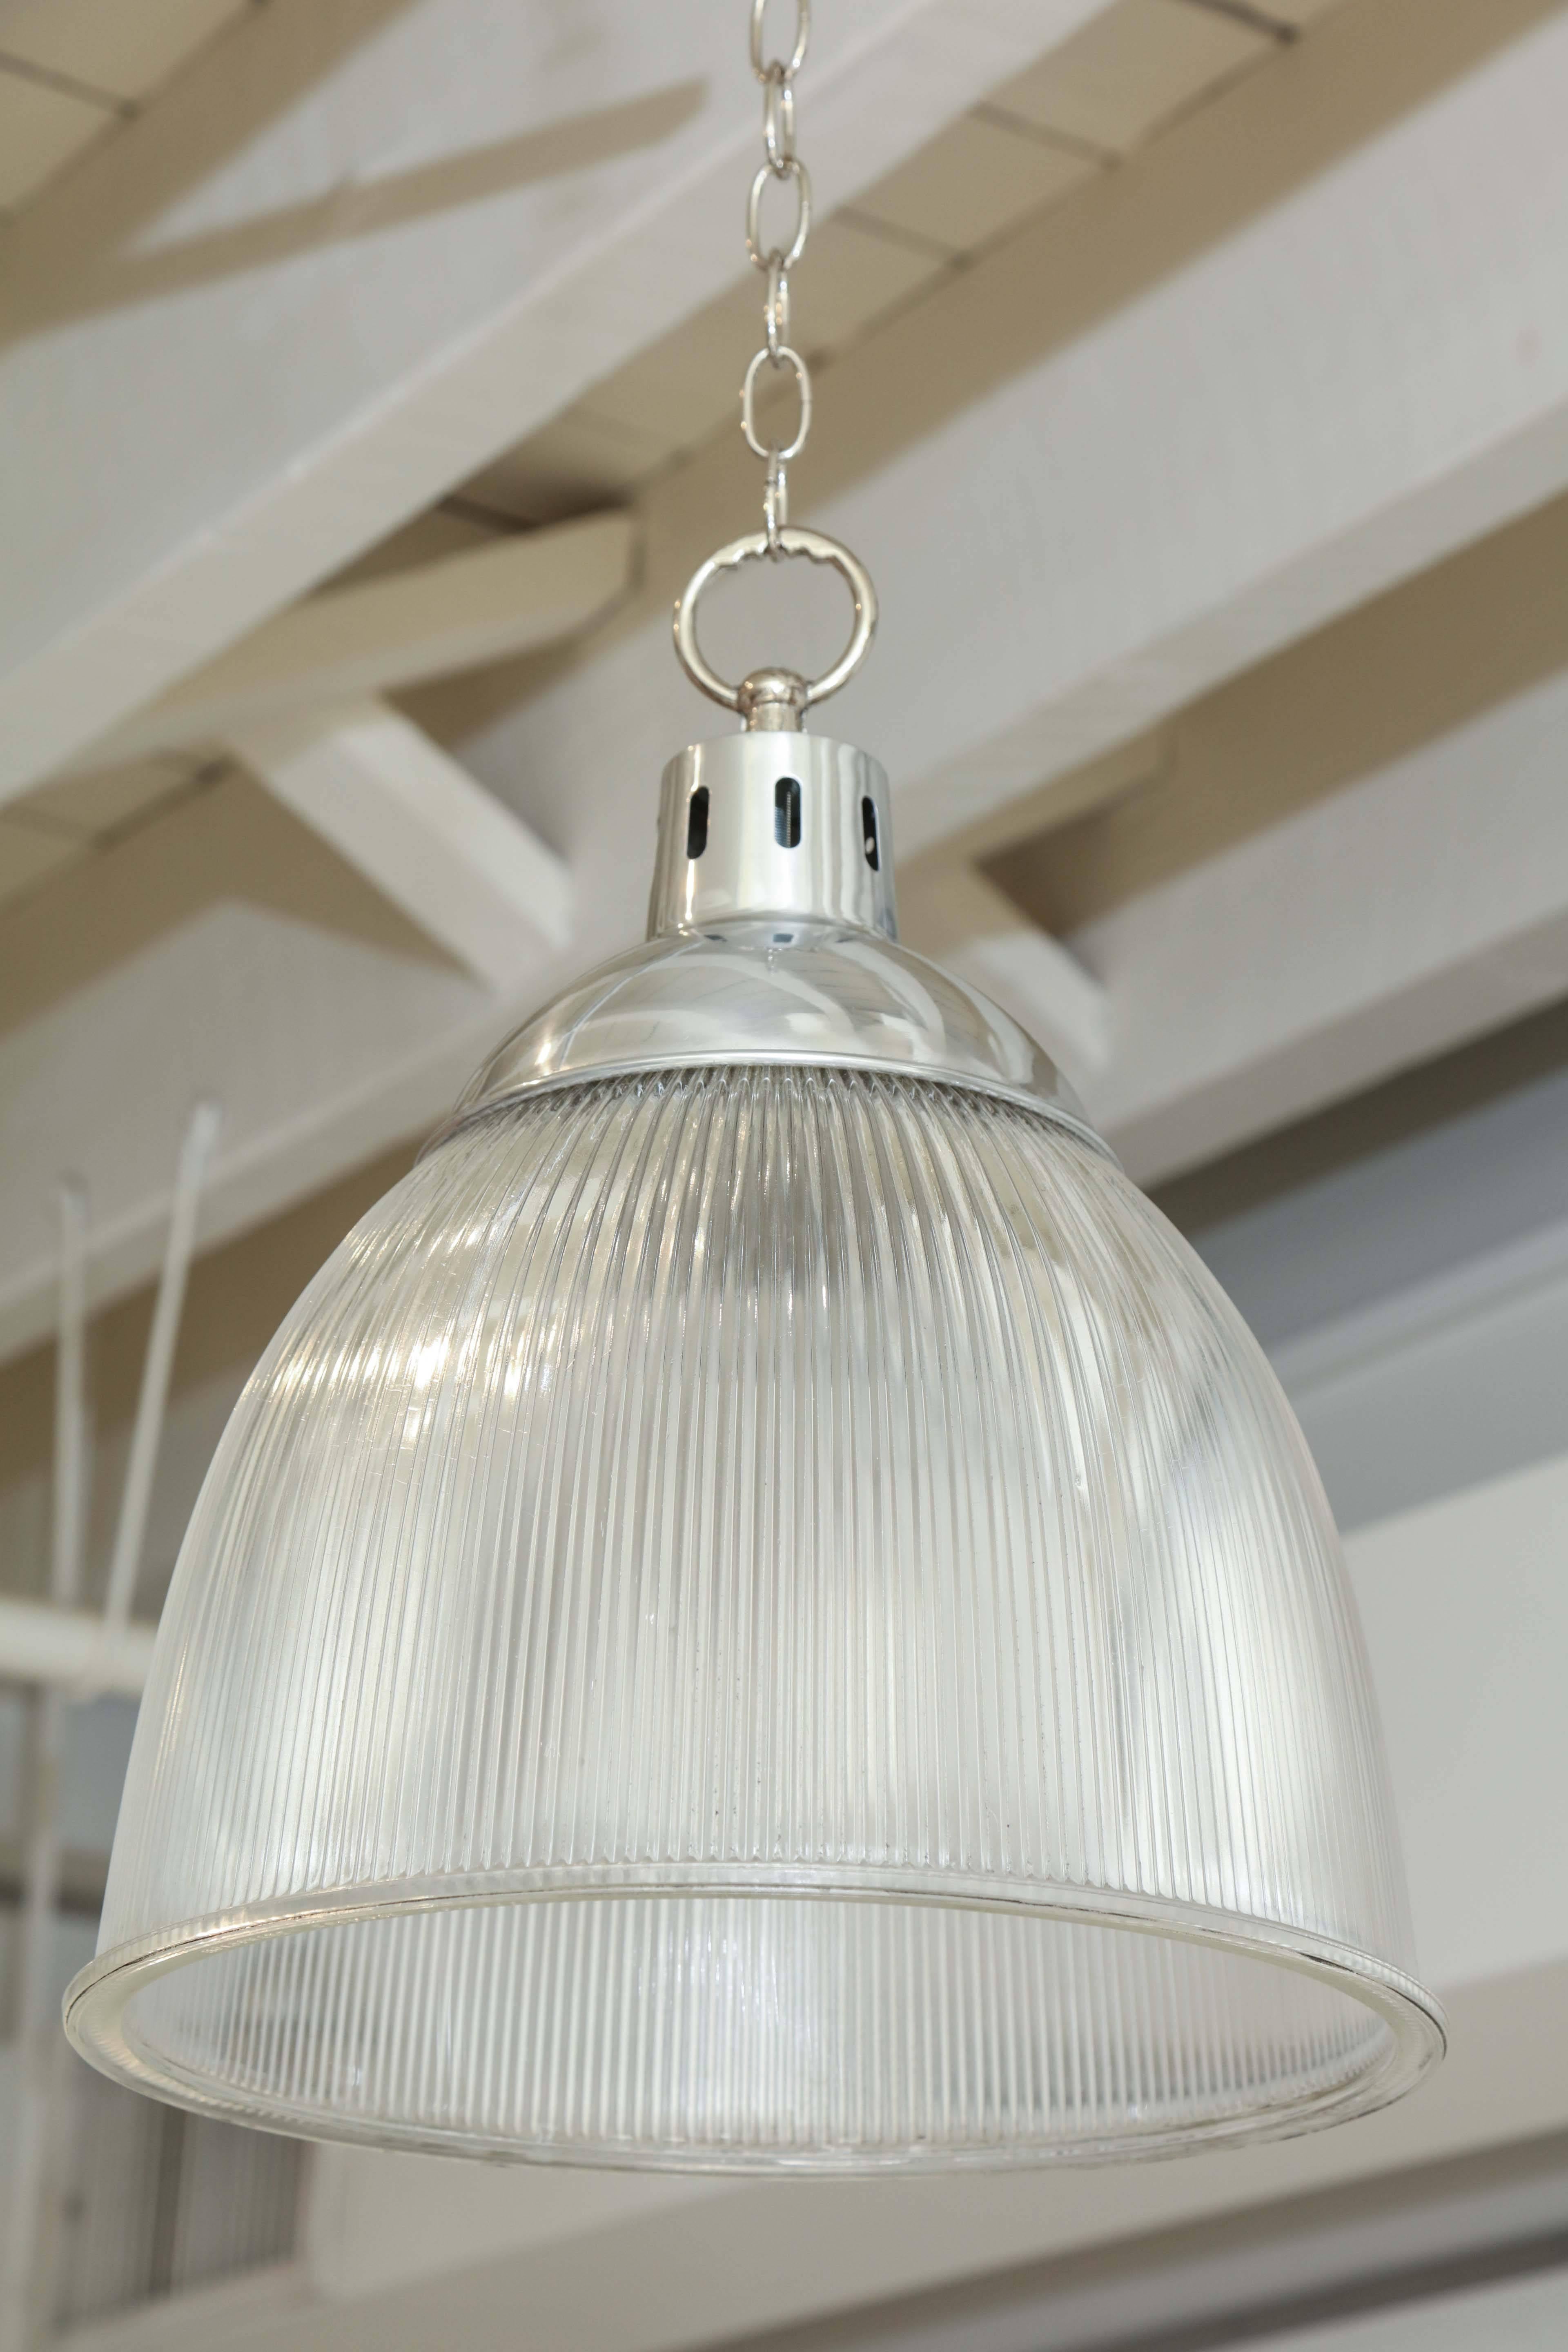 Pair of 1940s English Halophane and Aluminium Pendant Light Fixtures For Sale 1